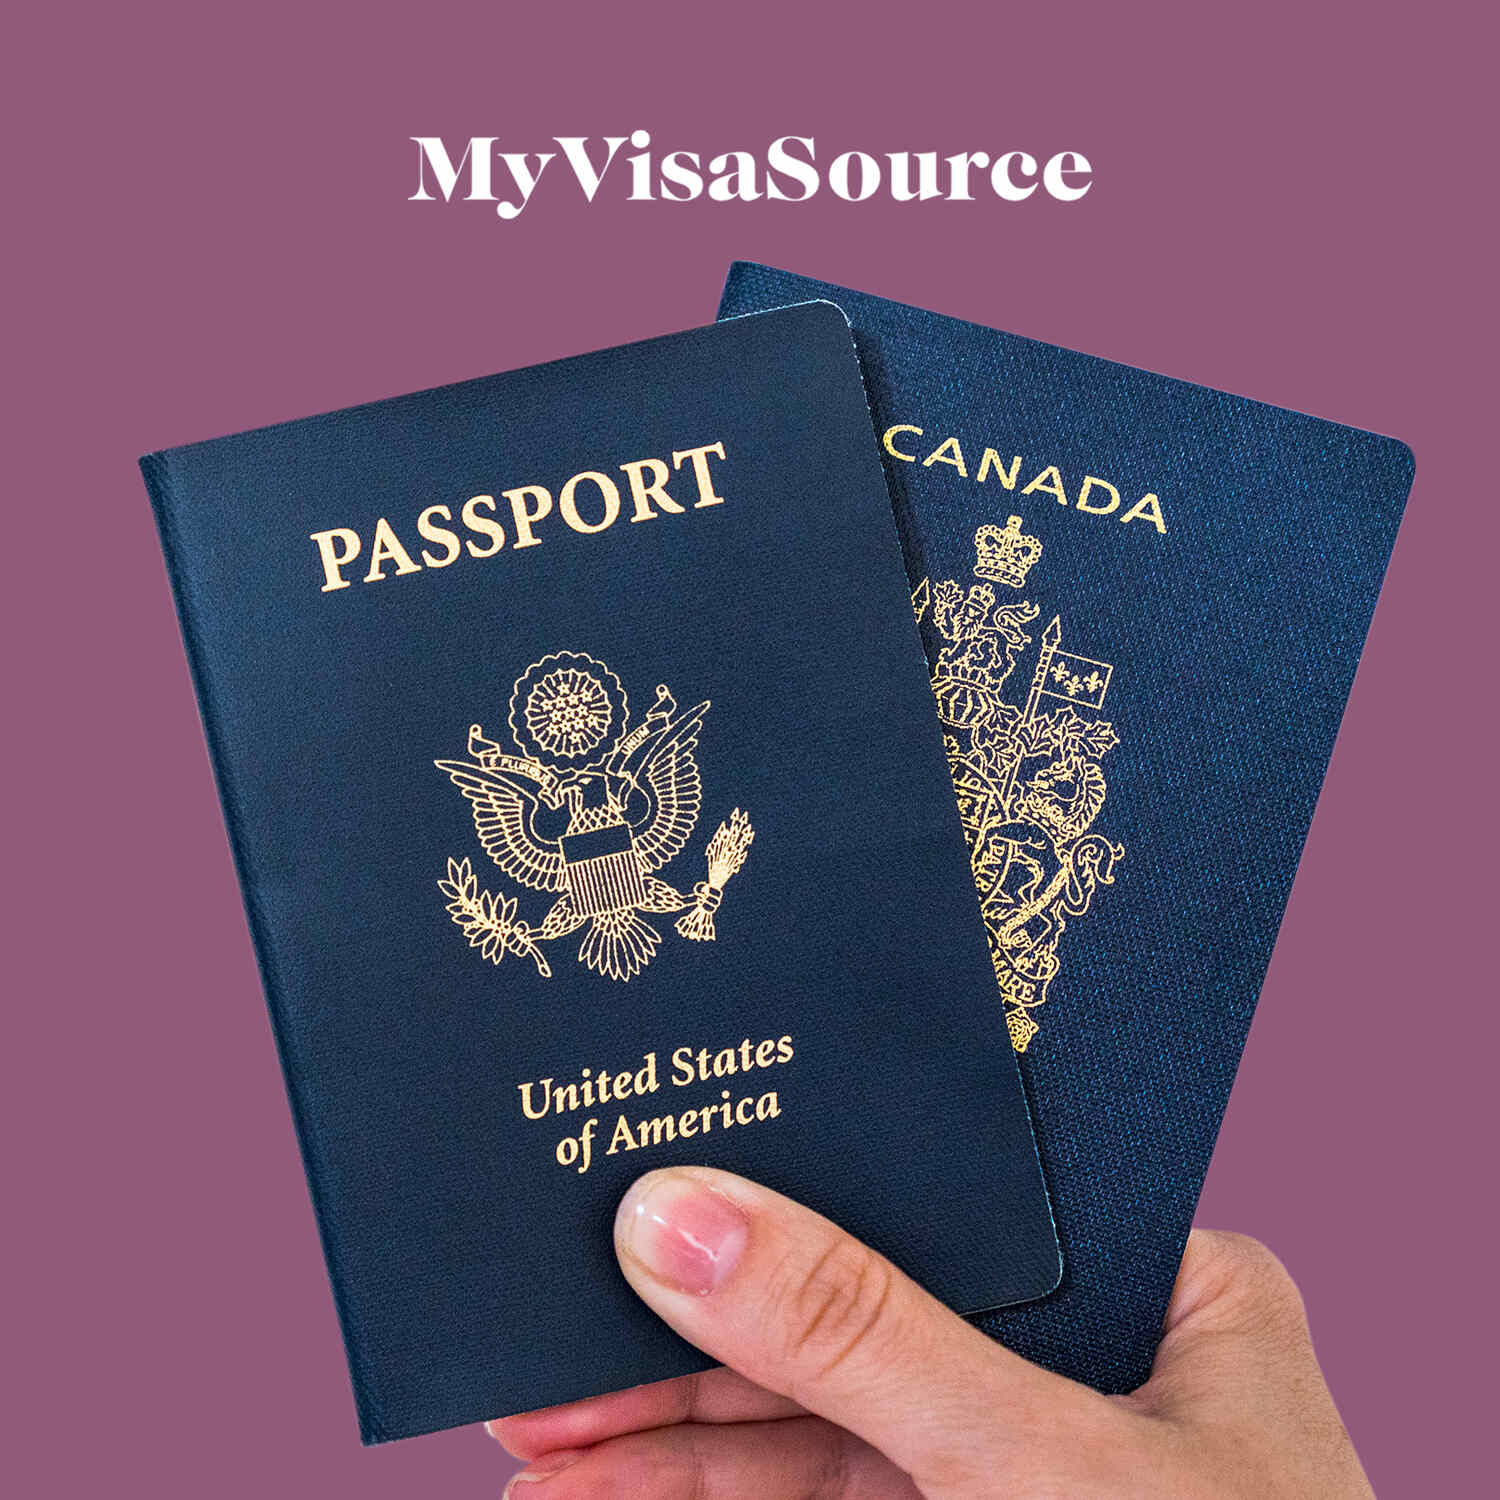 american and canadian passports side by side